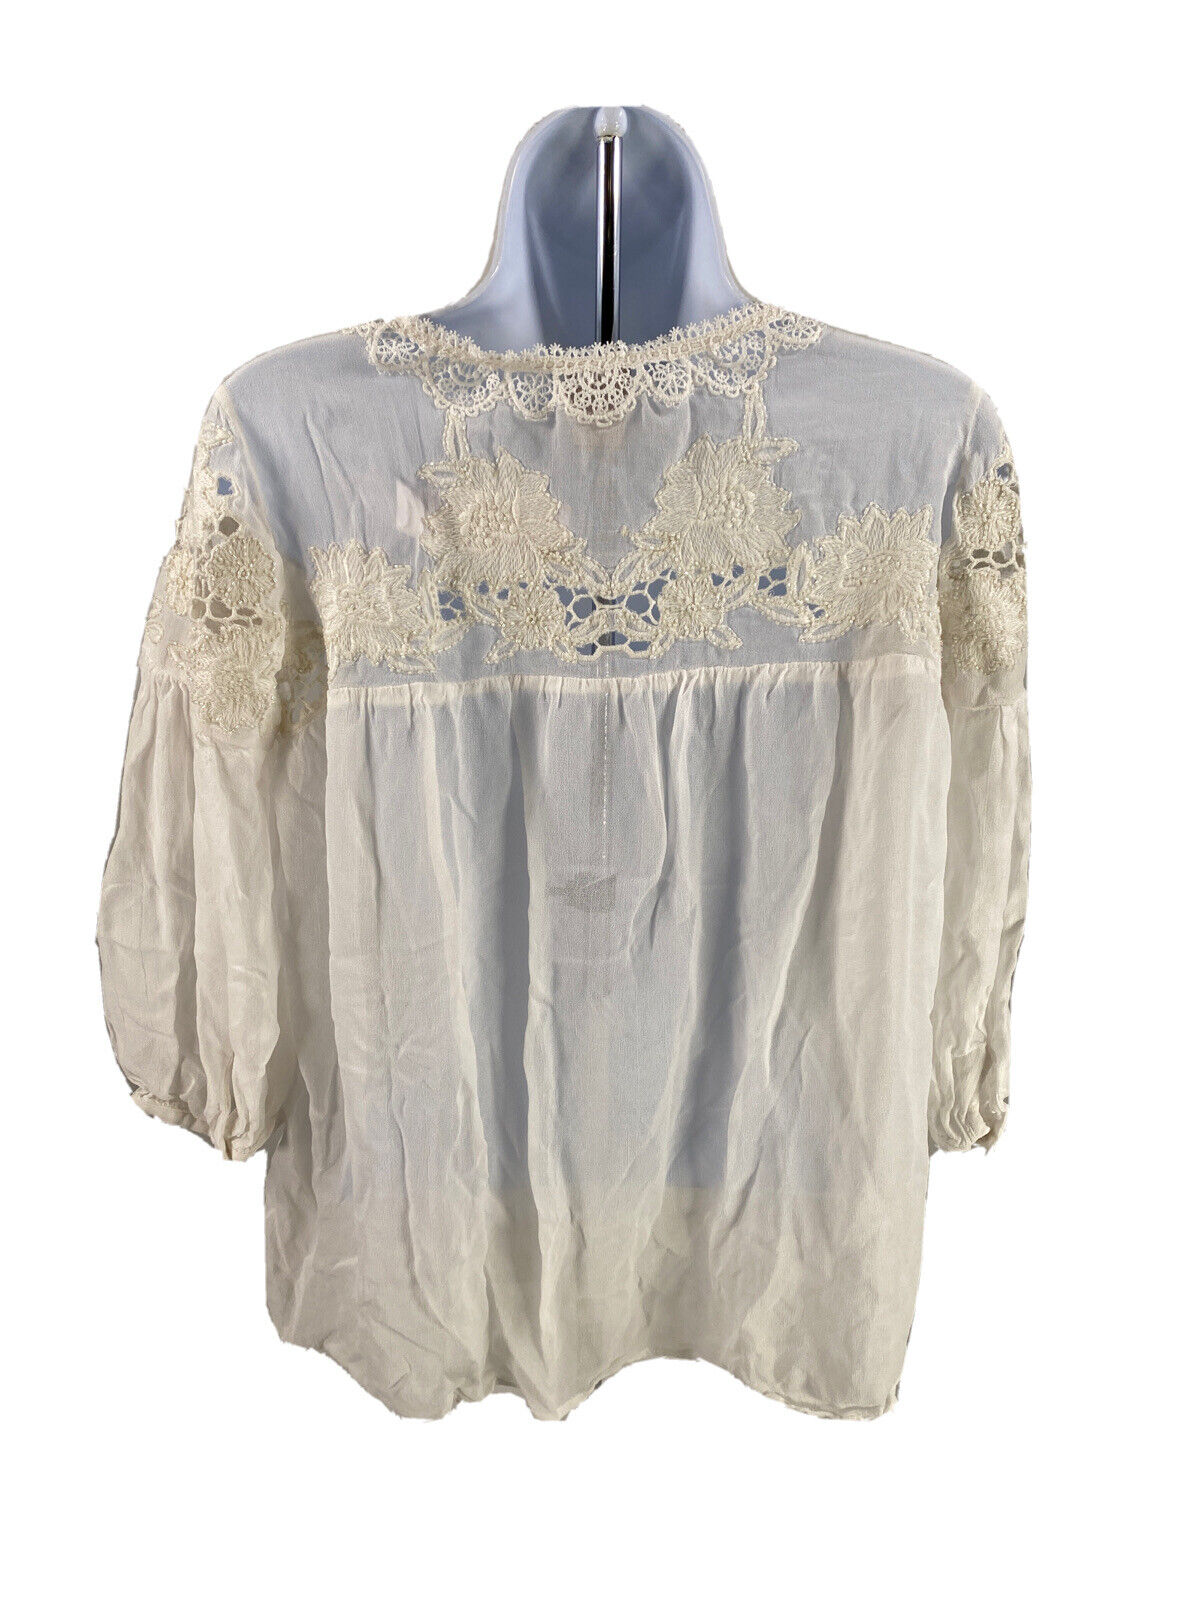 Chico's Women's White Sheer Lace Beaded 3/4 Sleeve Blouse - 0 (4/6)